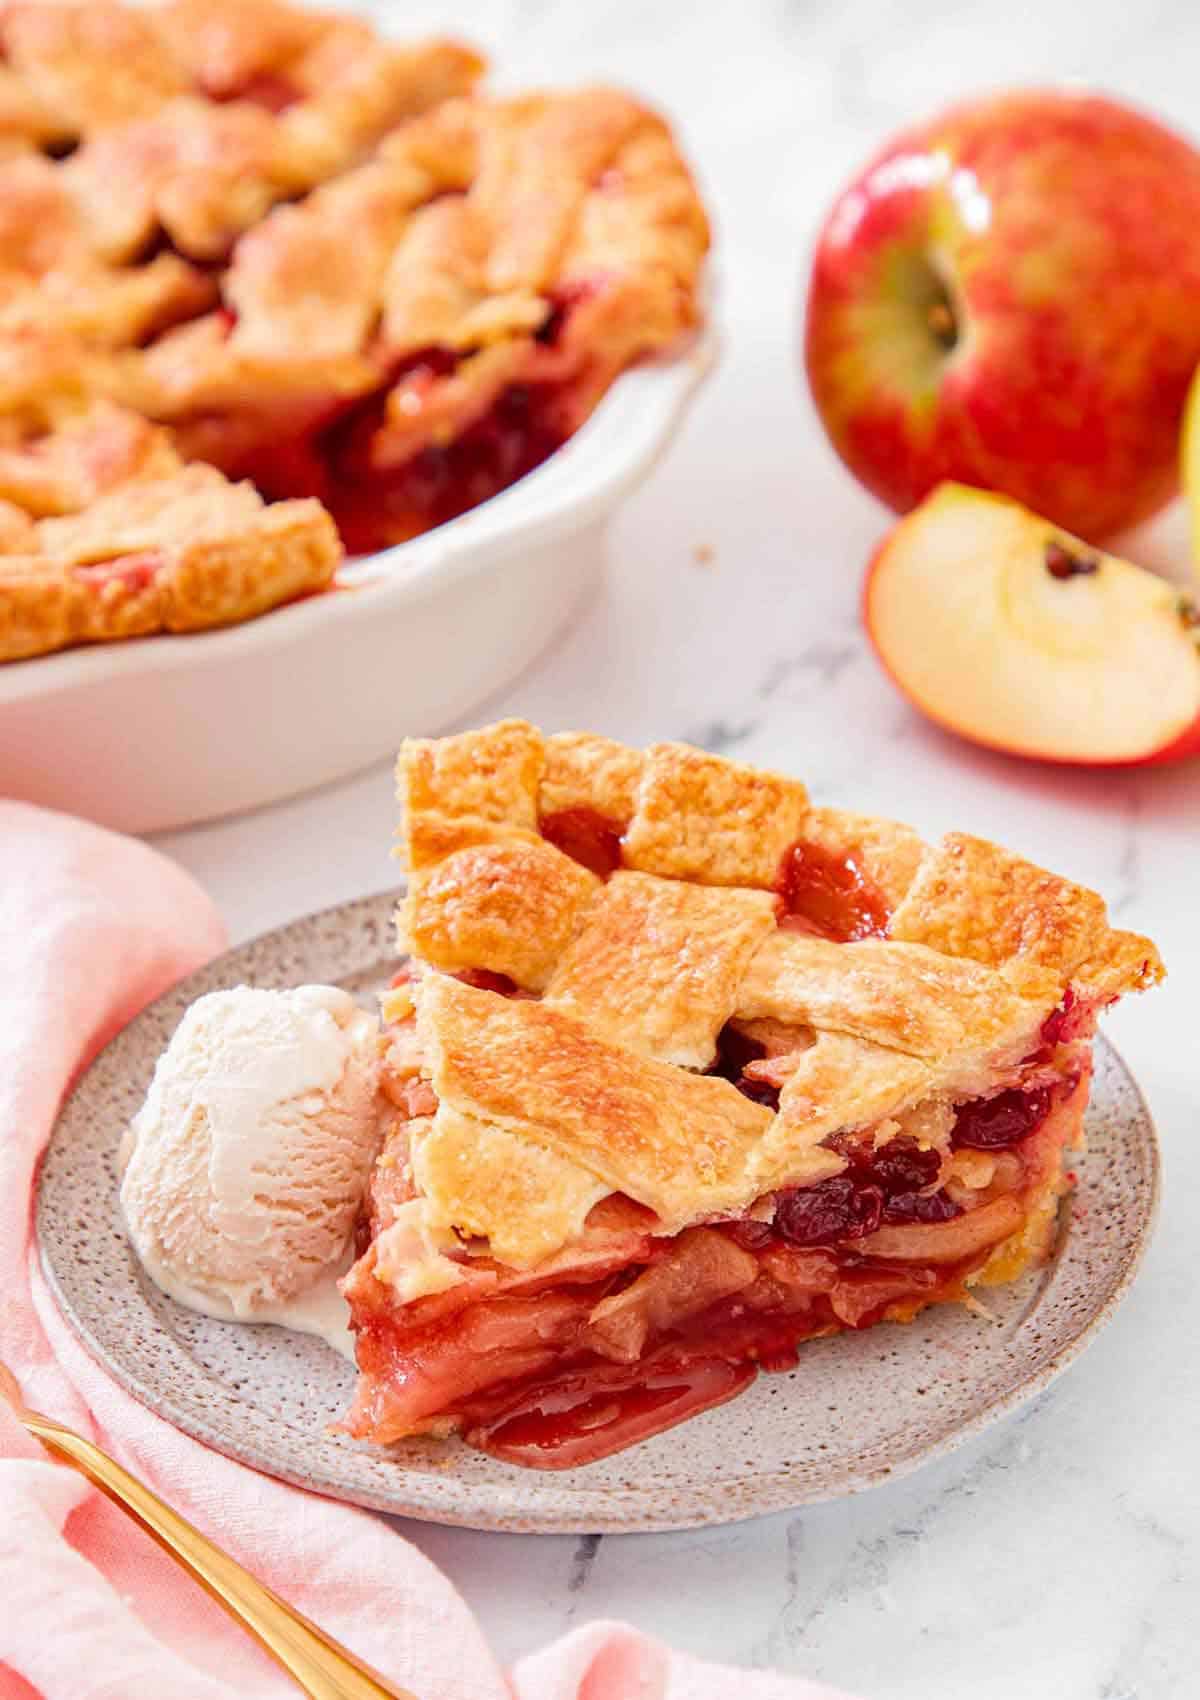 A slice of apple cranberry pie with a scoop of ice cream on the side. Rest of the pie in the background.